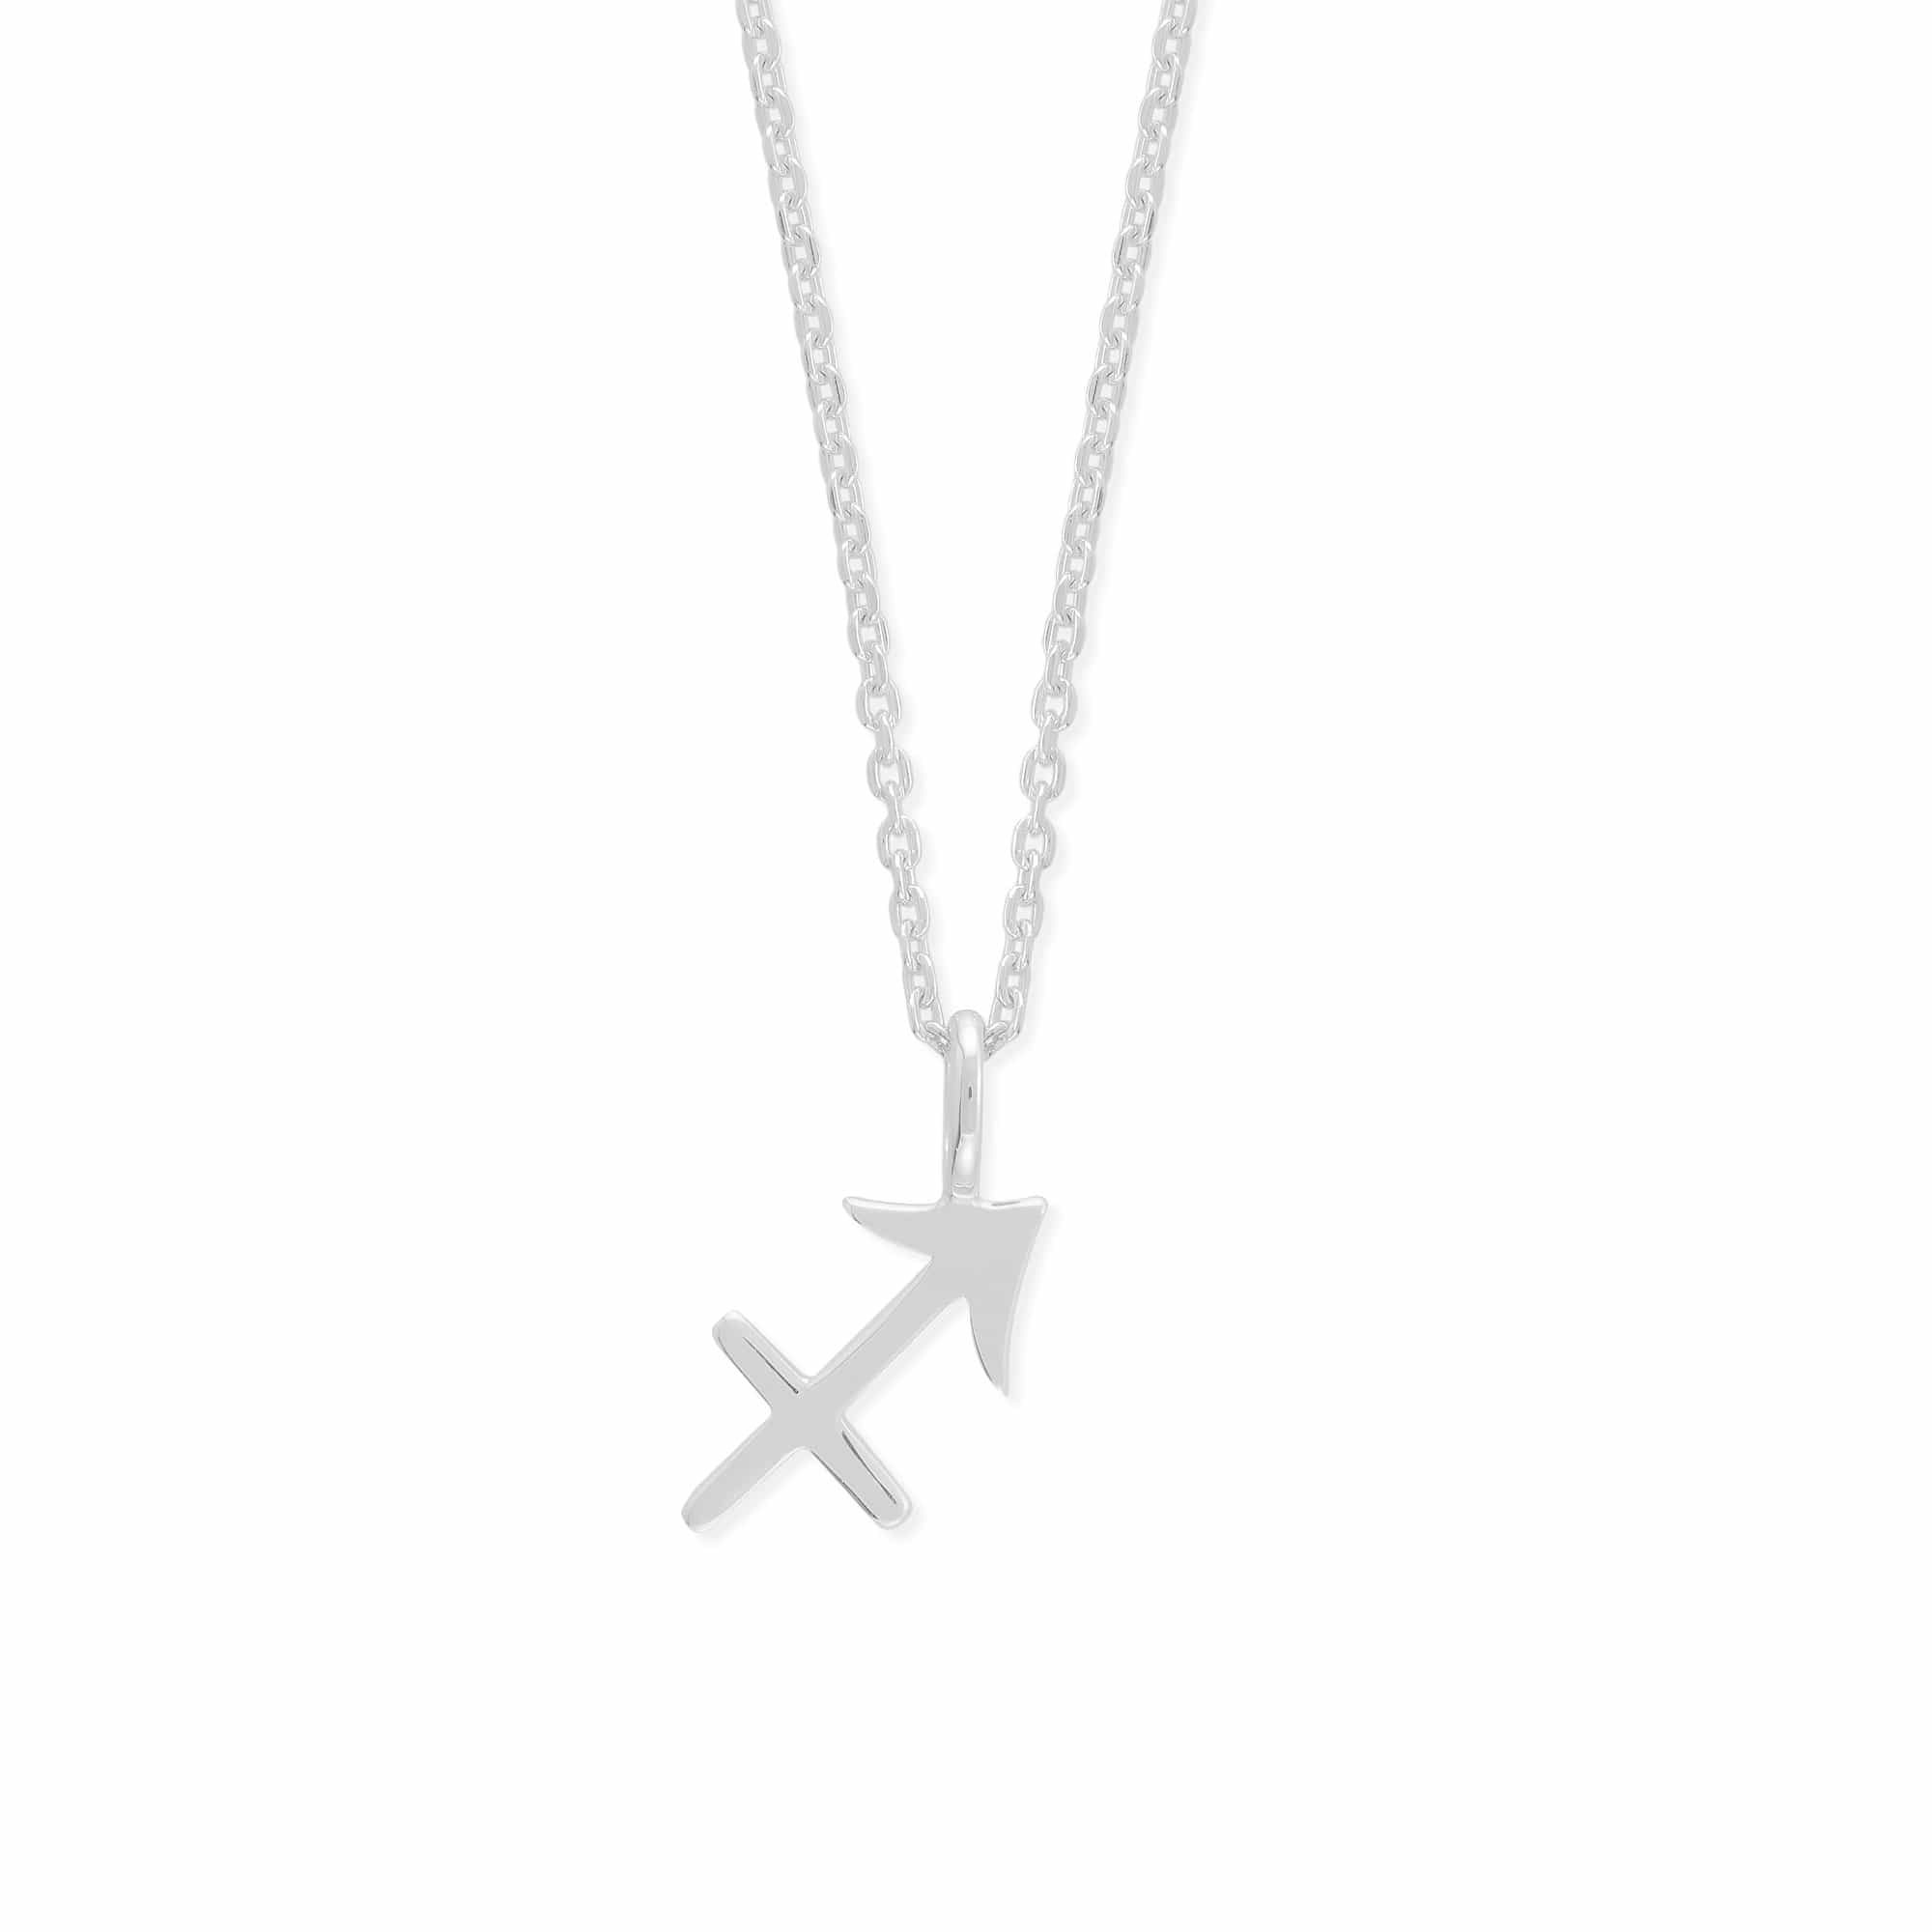 Boma Jewelry Necklaces Sterling Silver / Sagittarius Zodiac Necklace